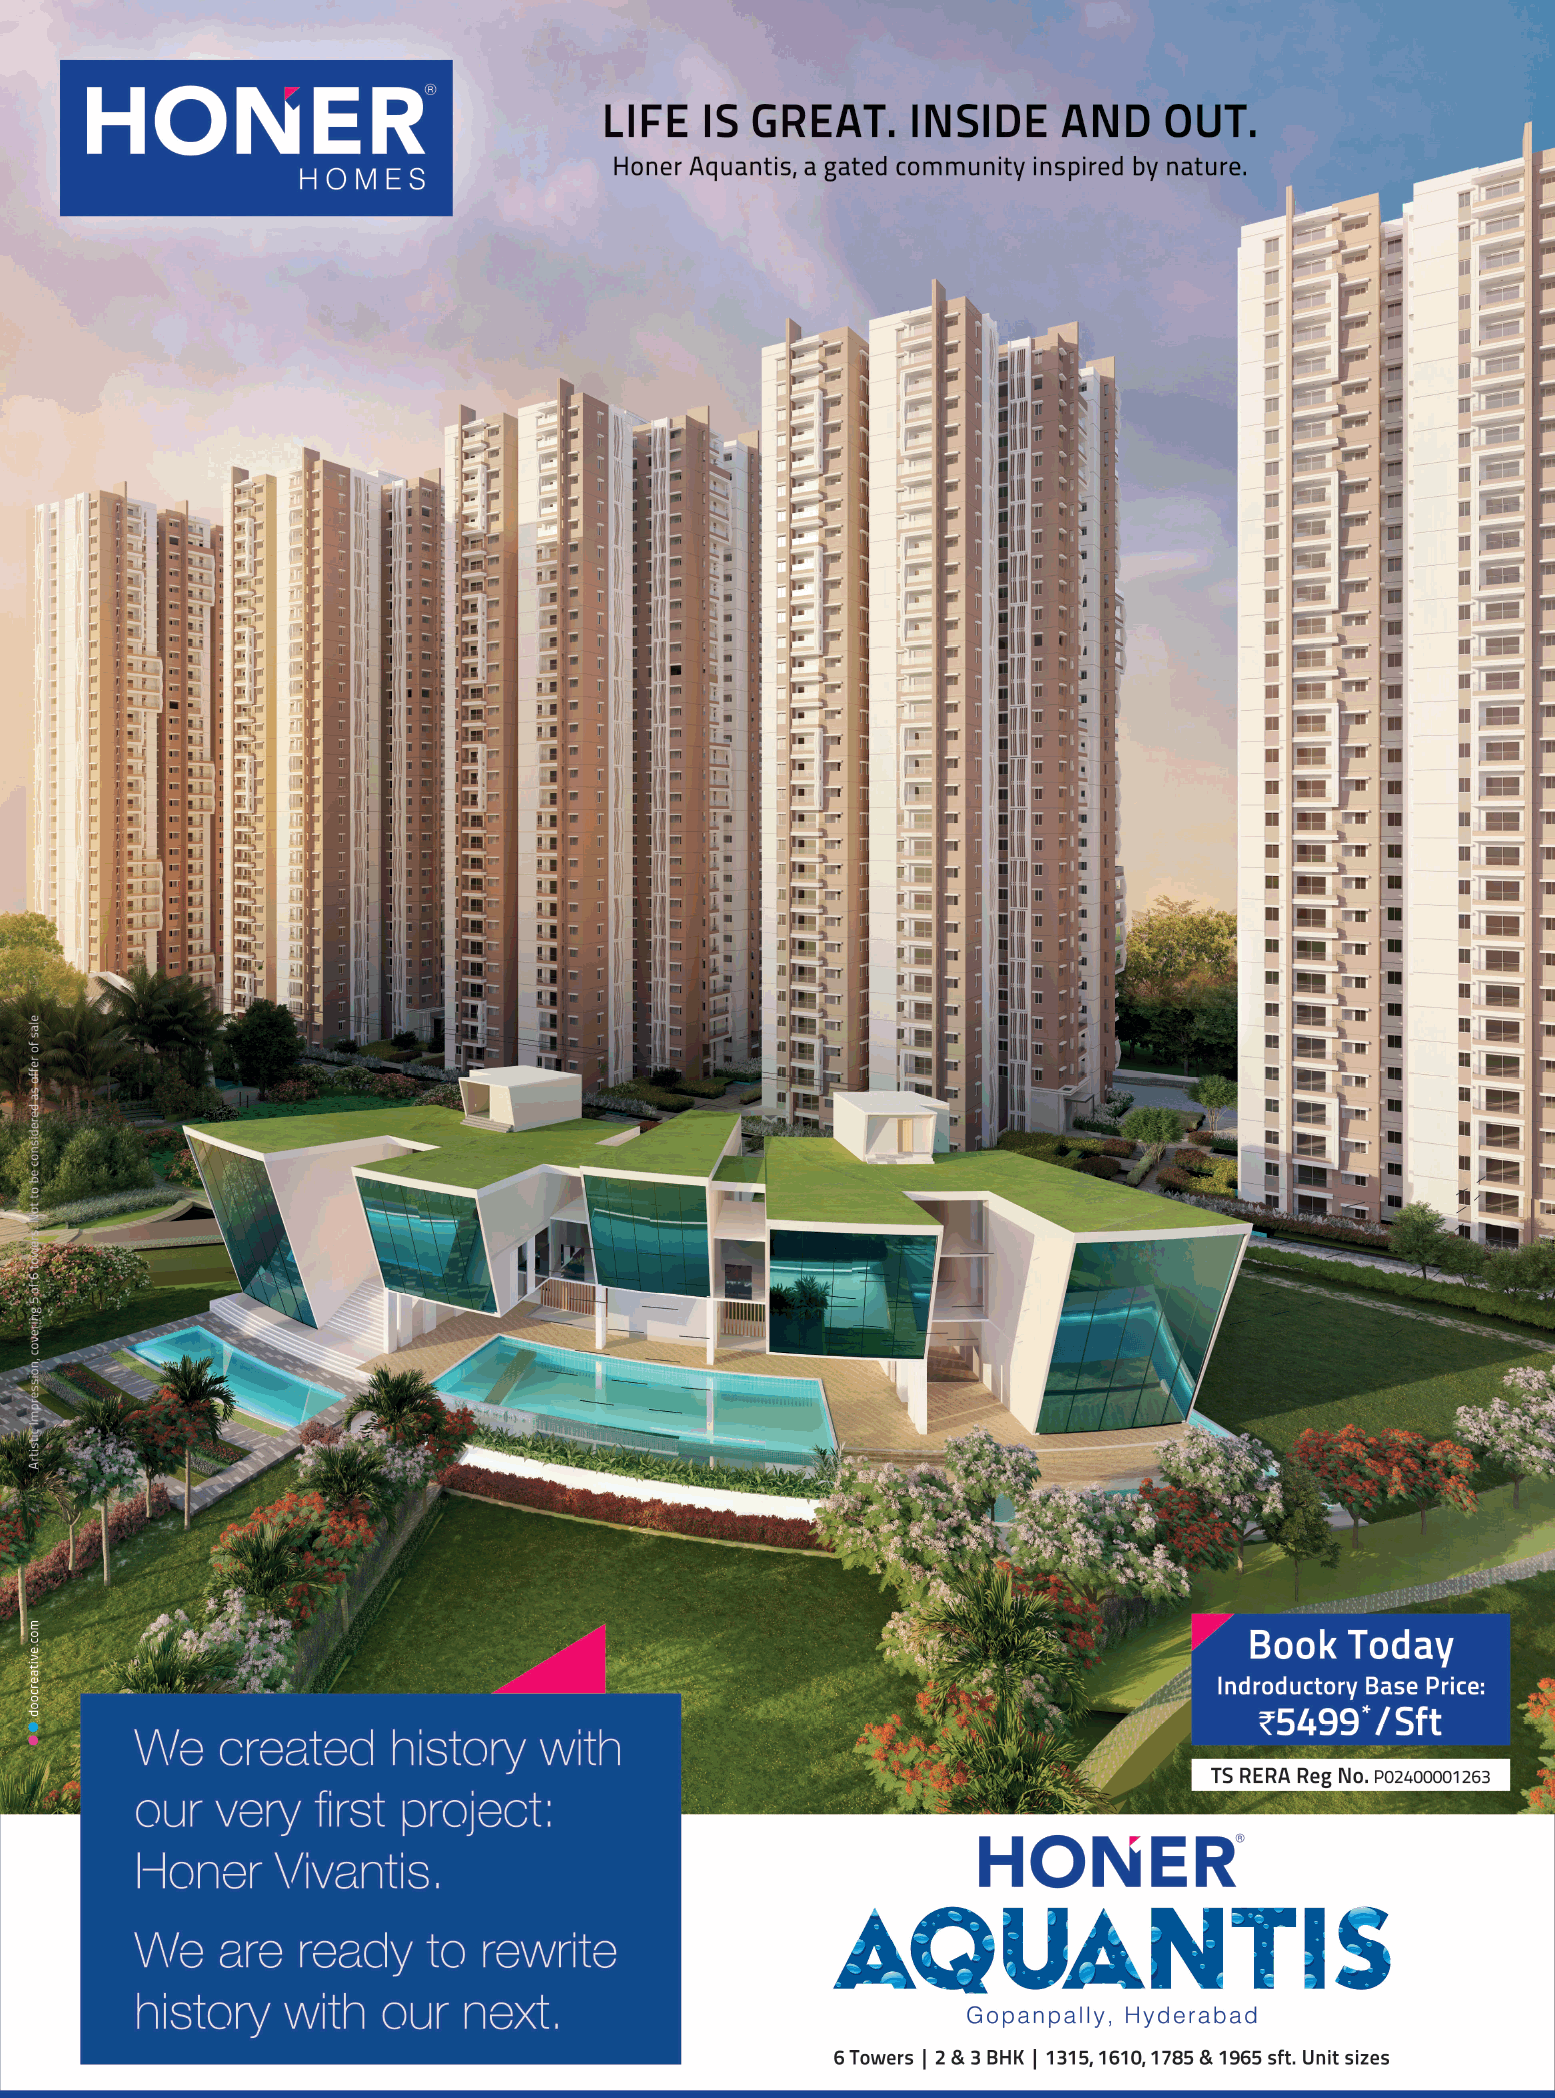 Book today indroductory base price Rs 5499 per sq ft at Honer Aquantis, Hyderabad Update